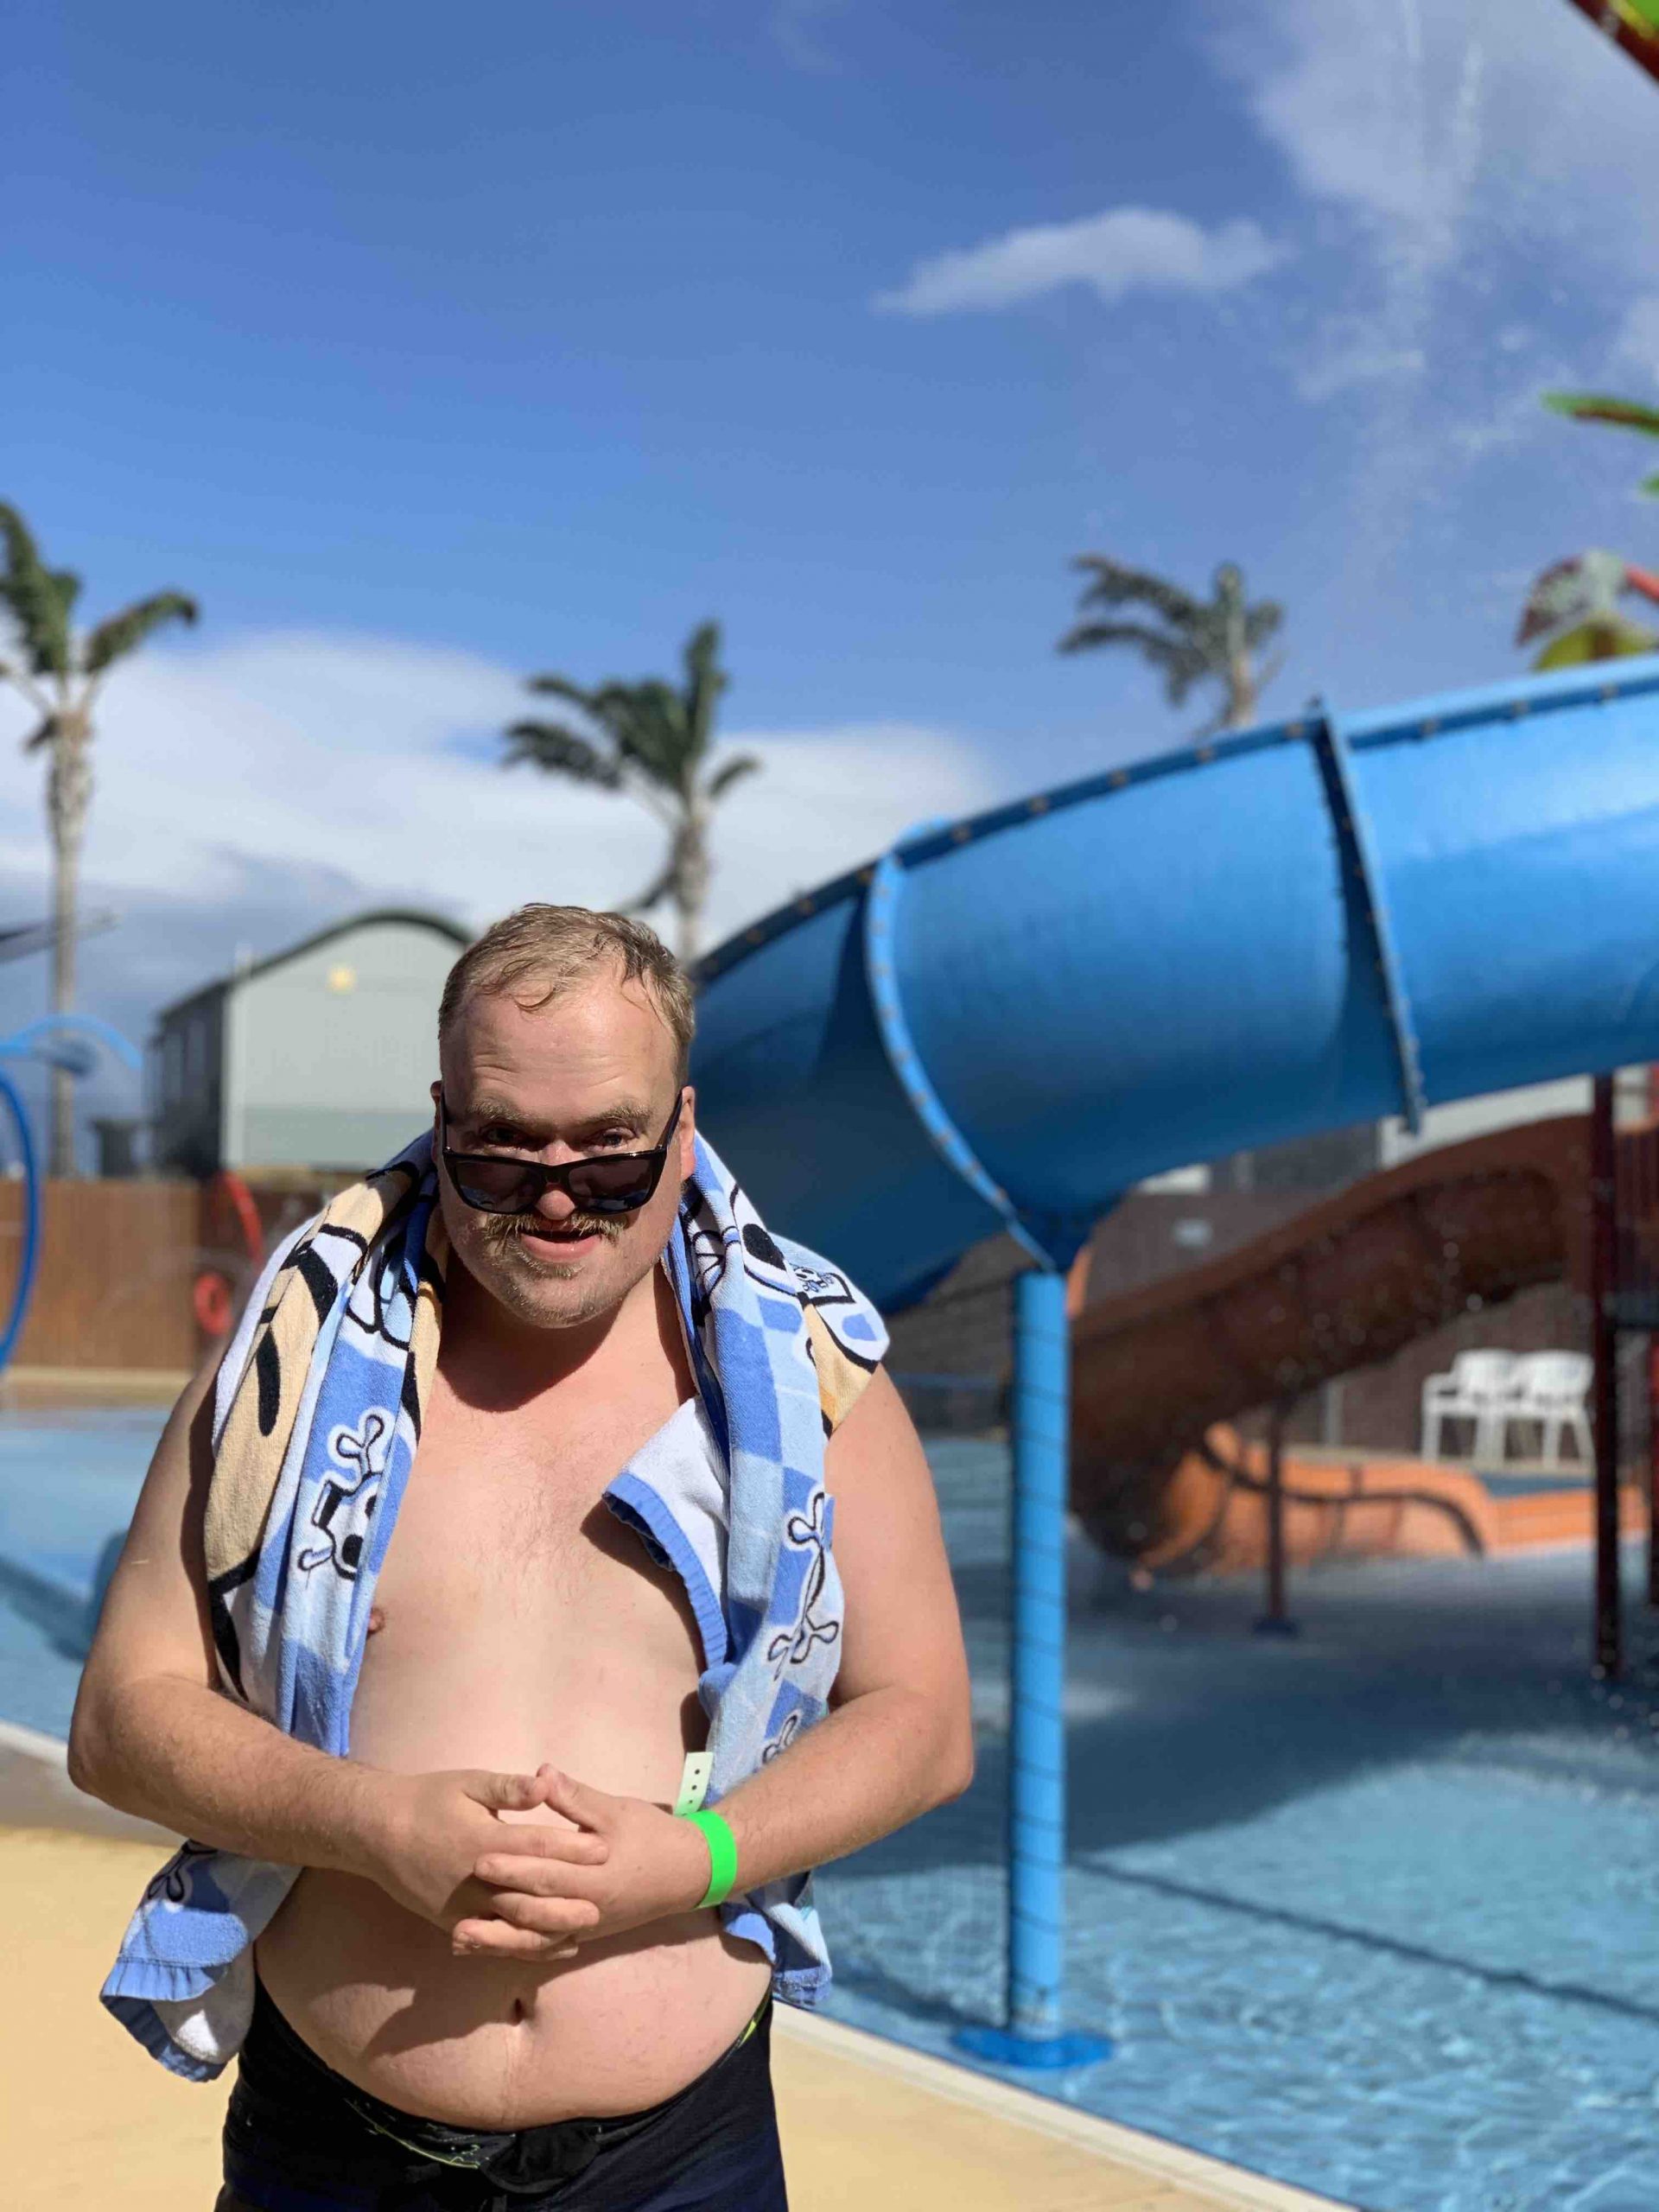 Adult with a disability at a water park